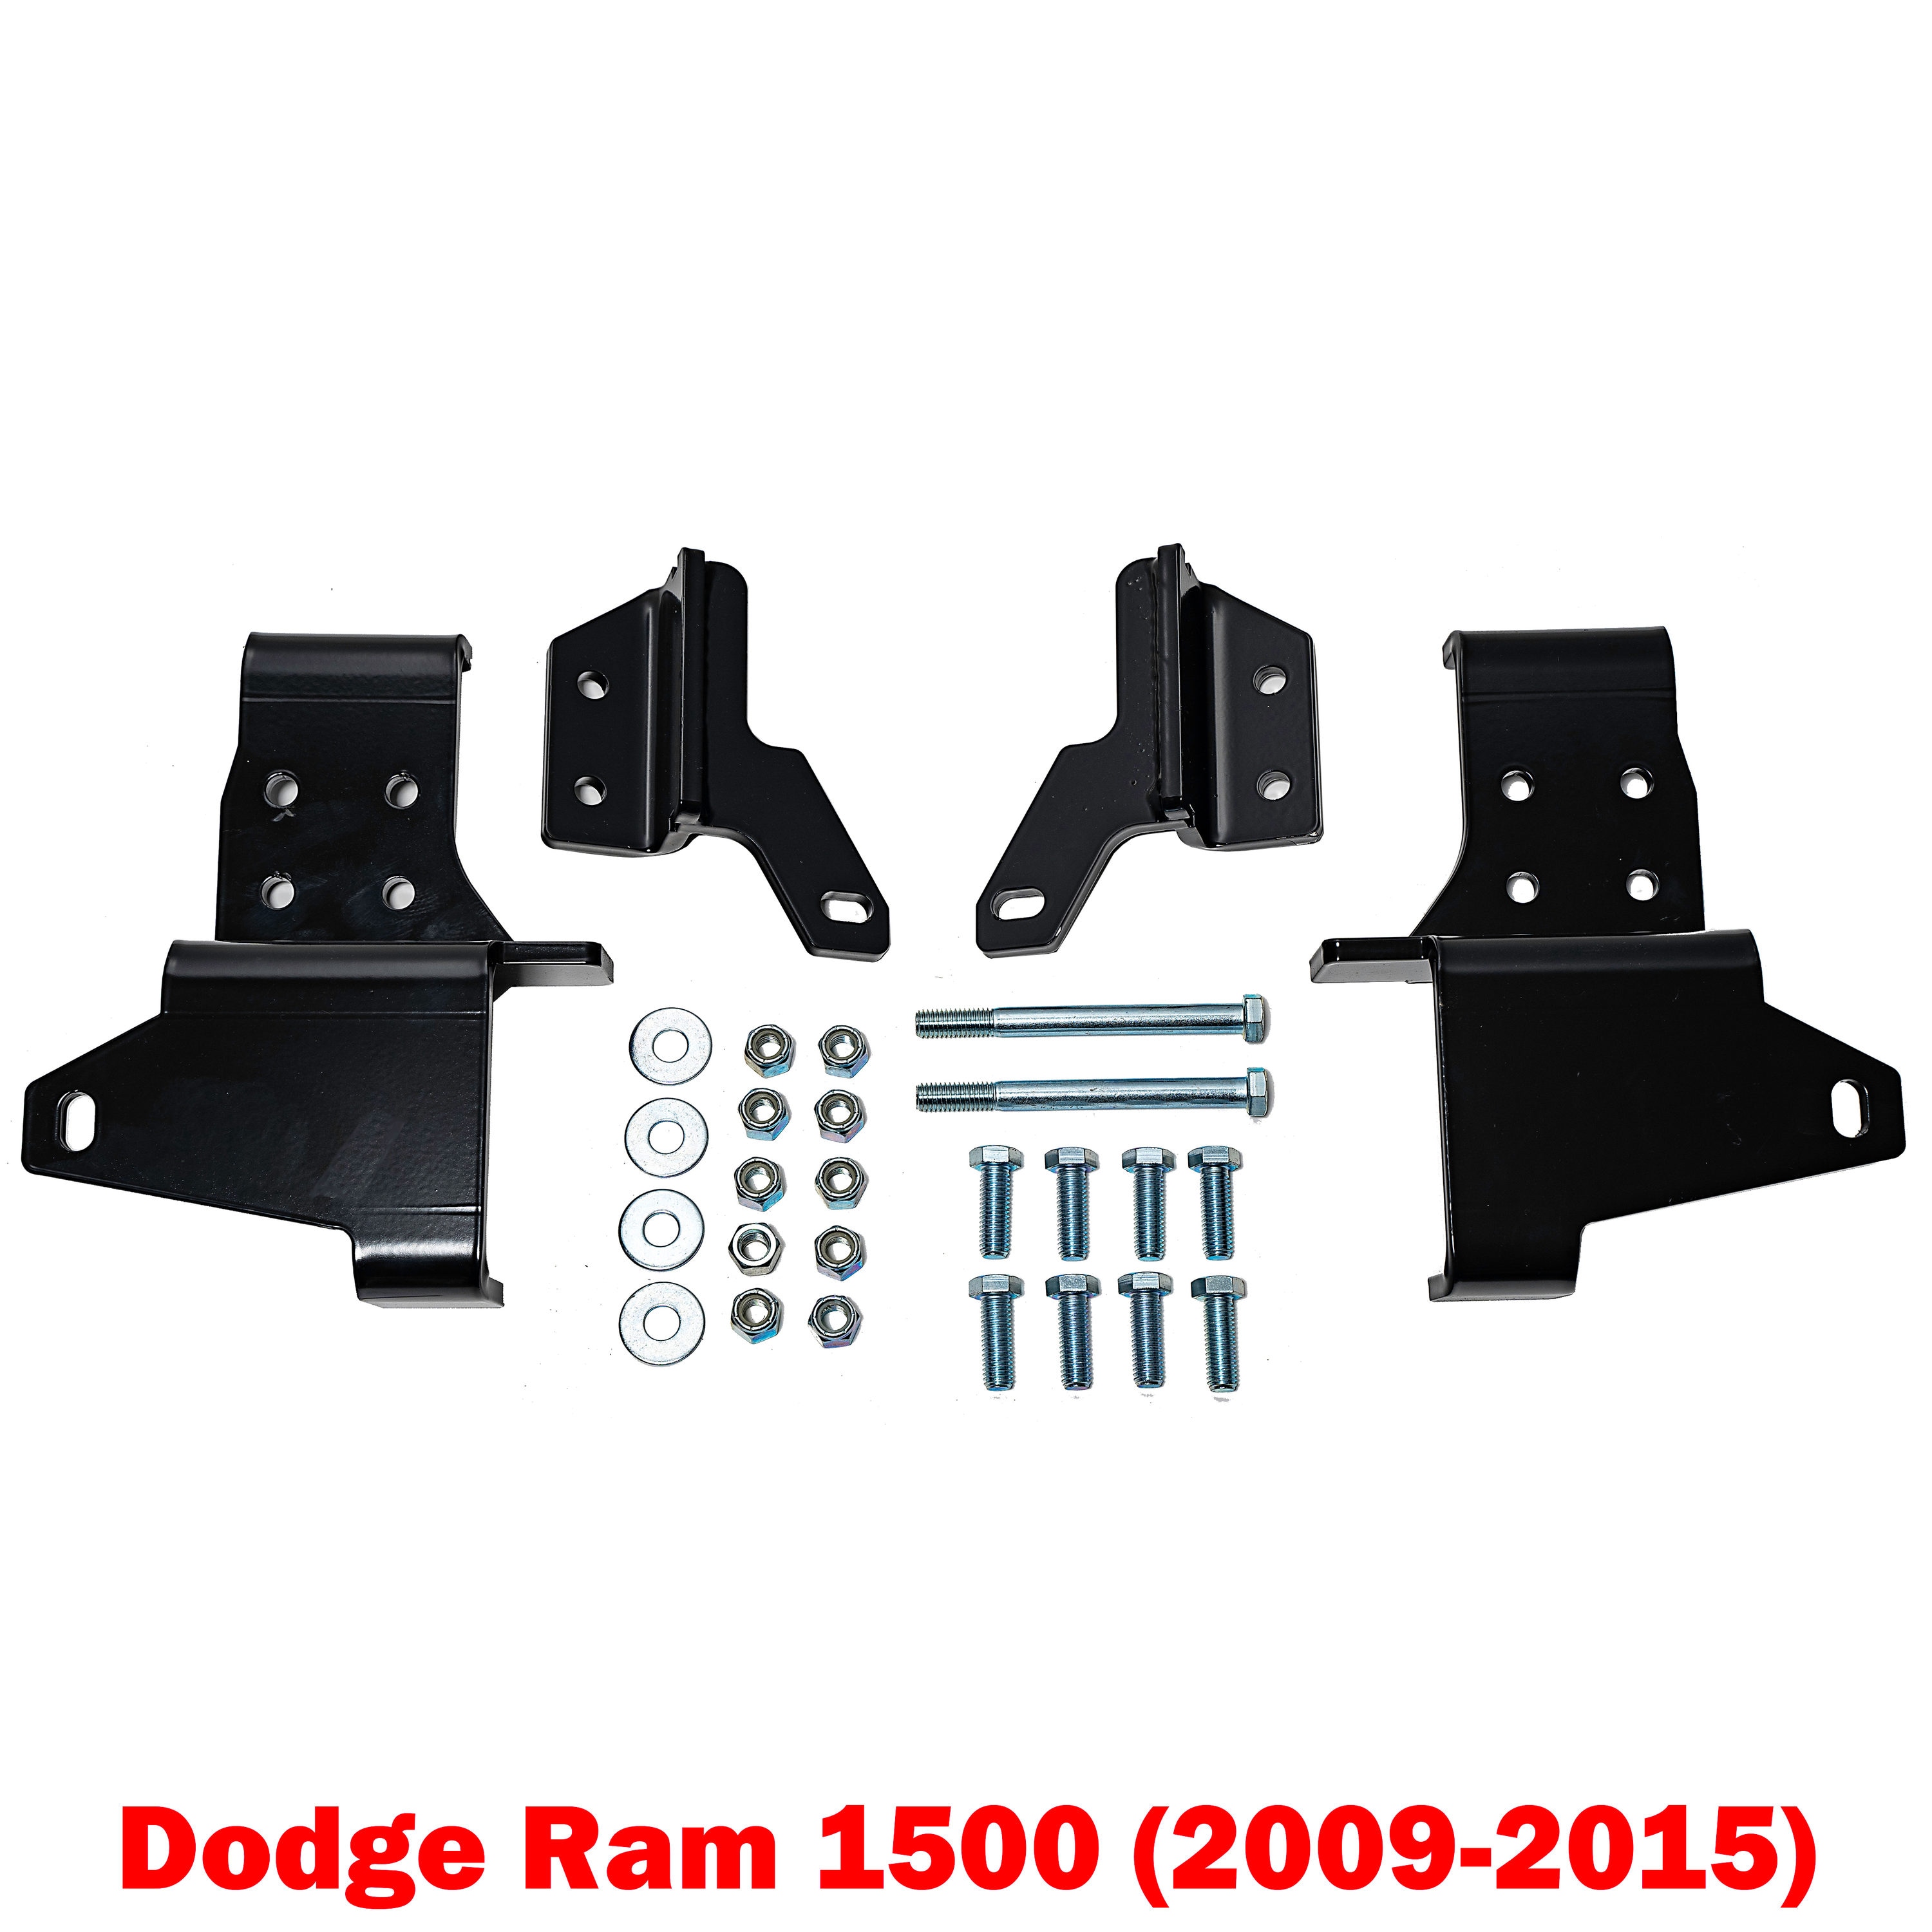 Detail K2 Mount Kit Snow Plow Accessory Compatible with Dodge Ram 1500 2009-2015 | 84314